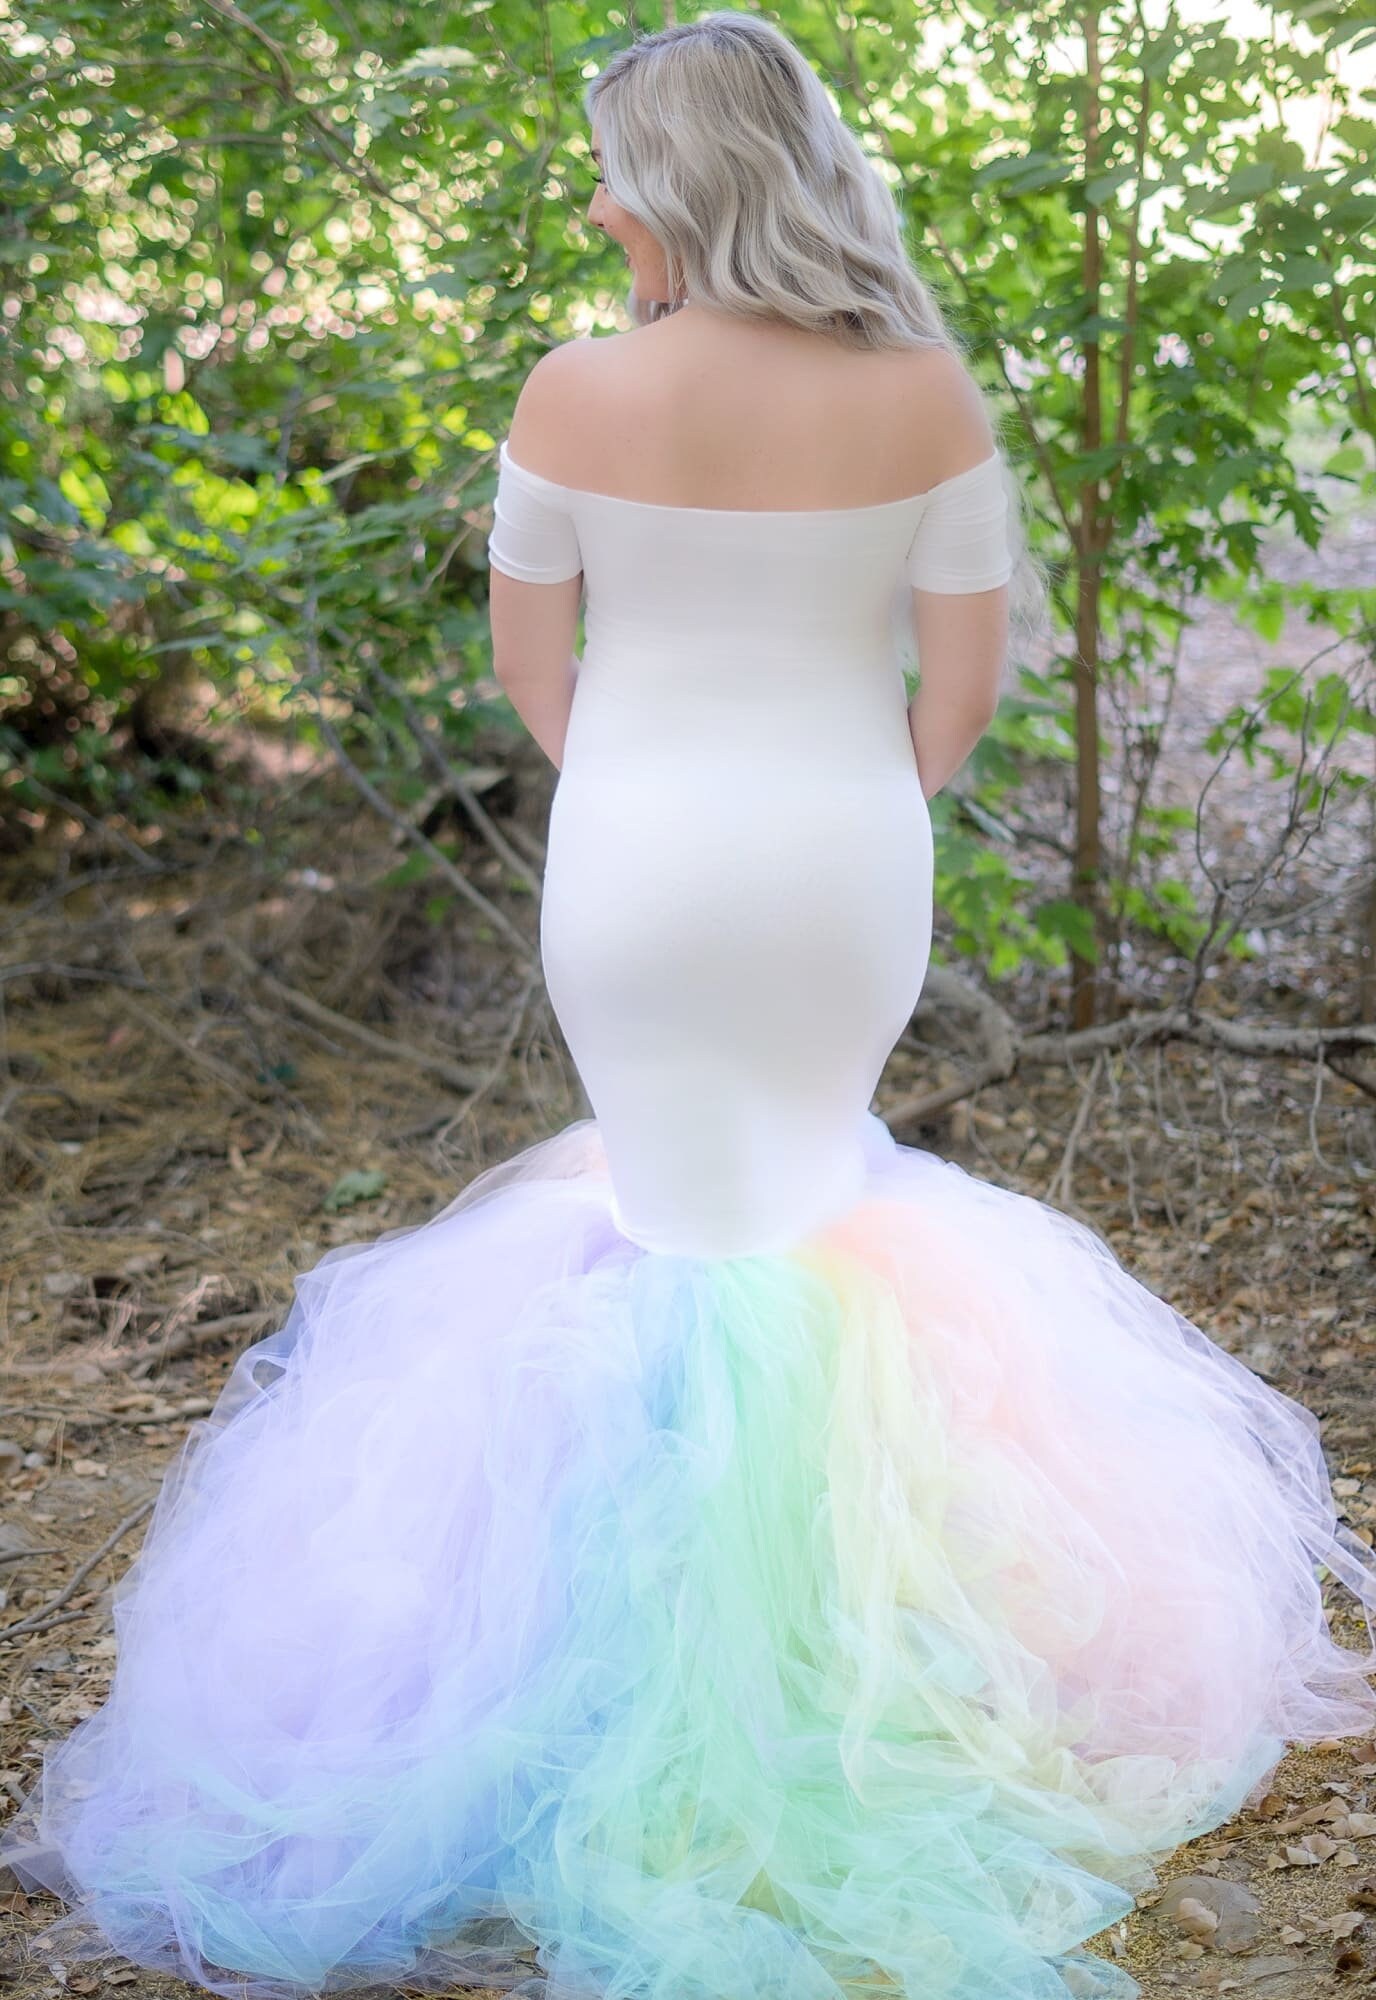 2020 Cute Colorful Women Tulle Robes Rainbow Tulle Dresses Bridal Maternity  Ruffled Tulle Dress Long Sleeve Sheer Party Dress349C